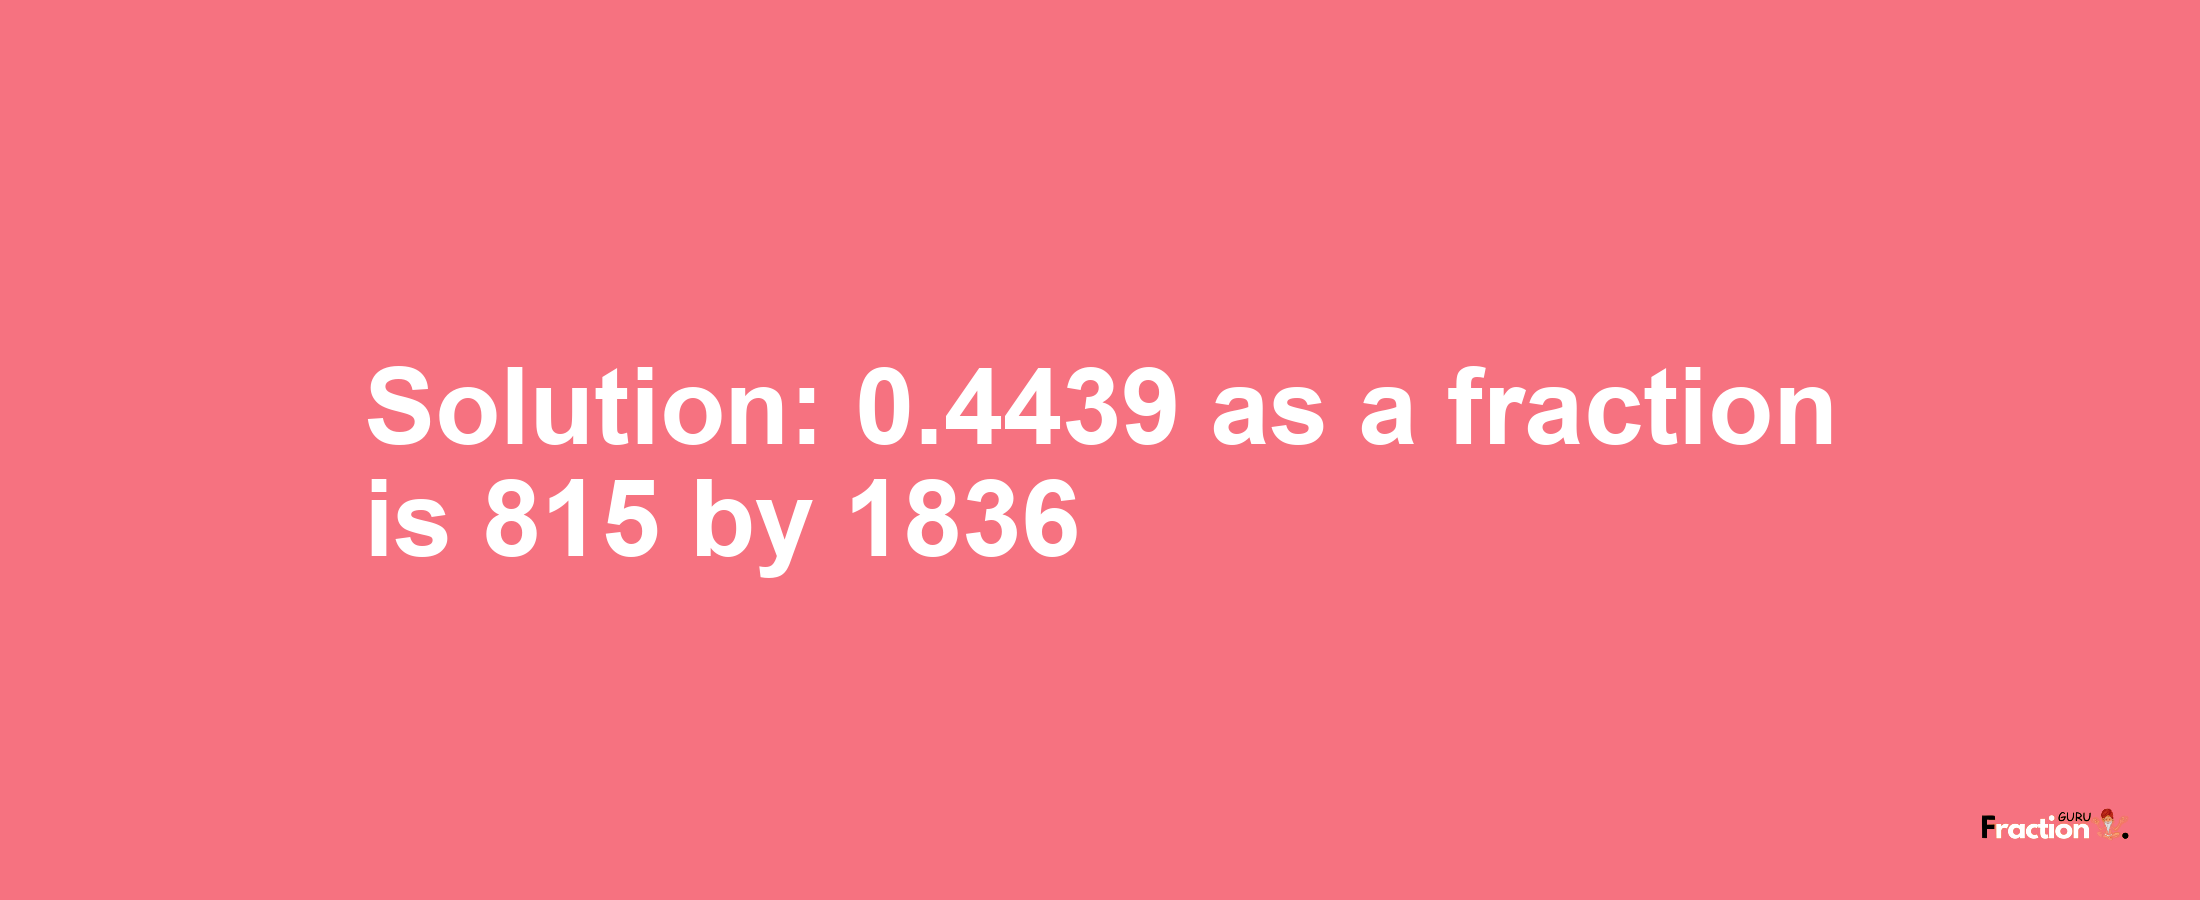 Solution:0.4439 as a fraction is 815/1836